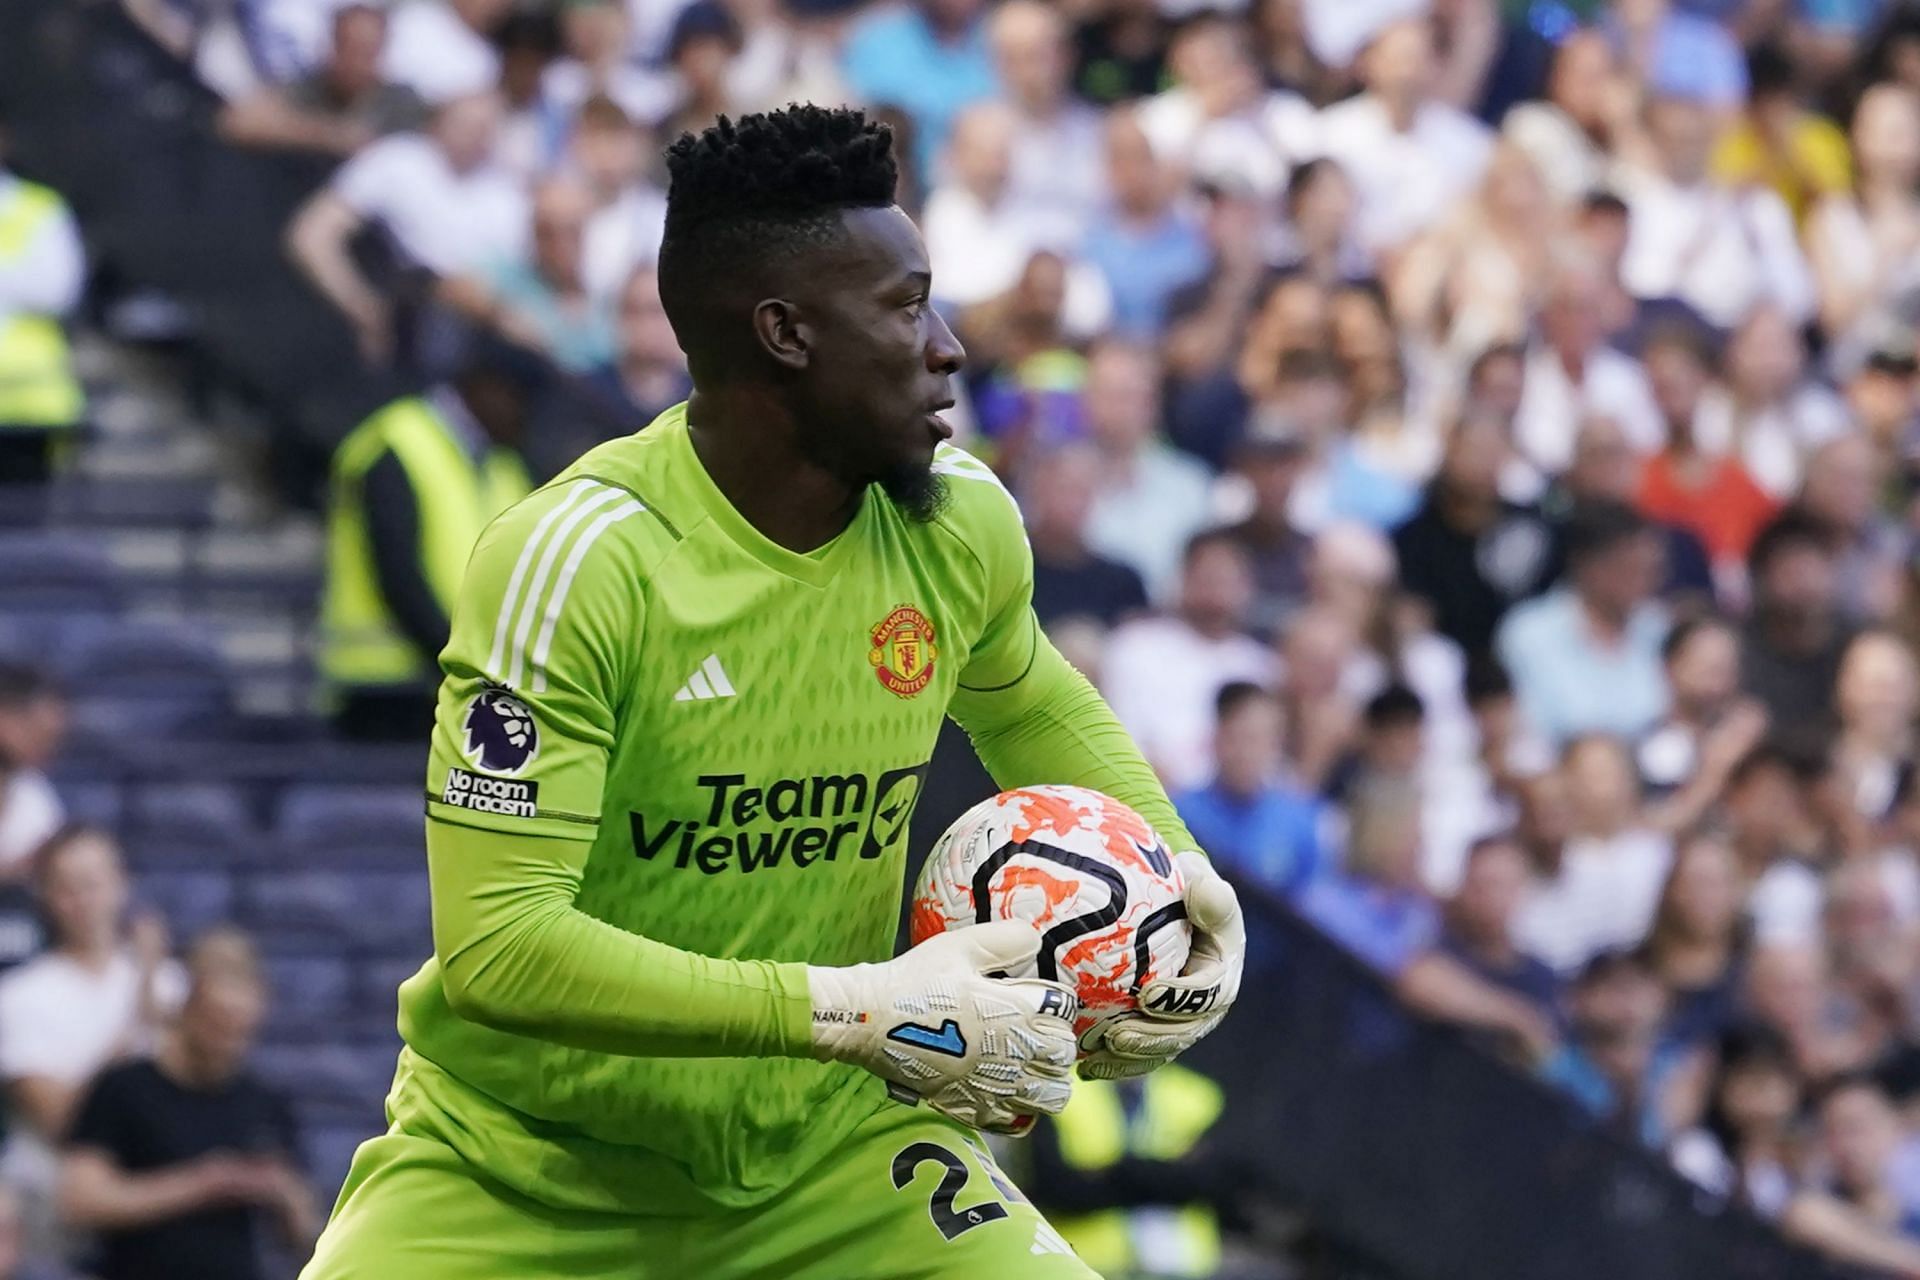 Despite the result, Onana put in another eye-catching display in goal for United